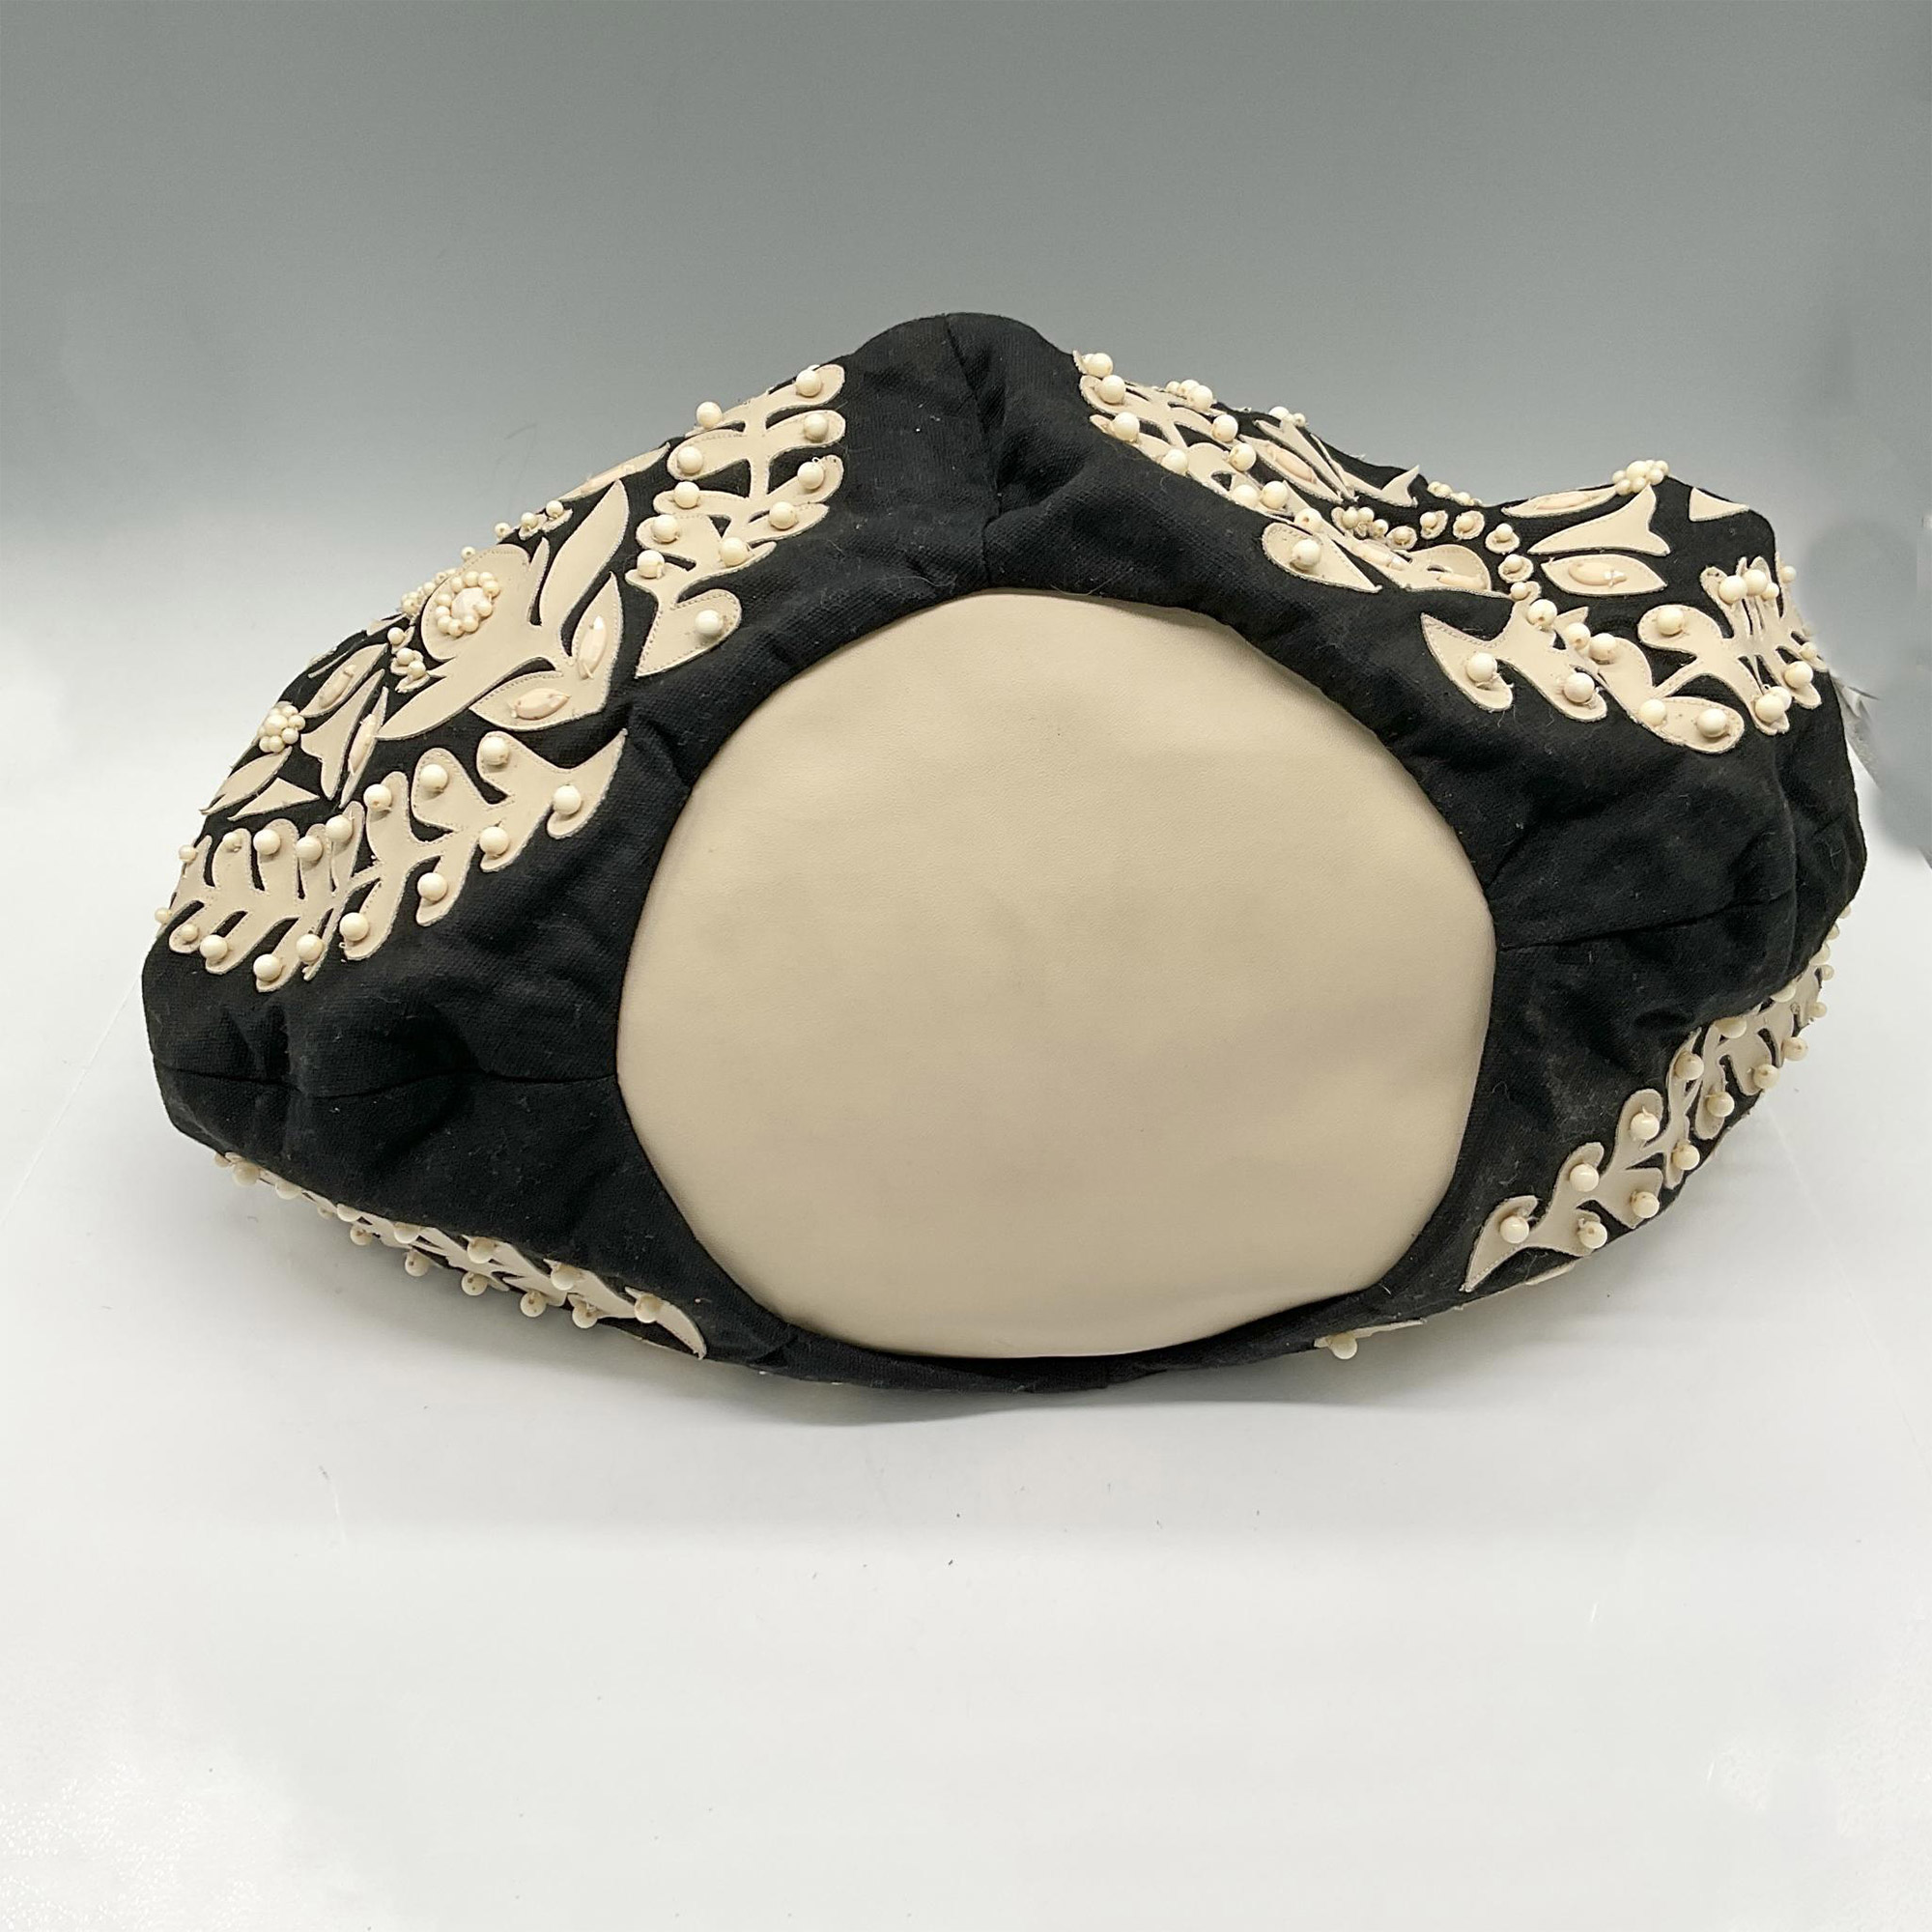 Mary Frances Black and Cream Hobo Bag - Image 2 of 4